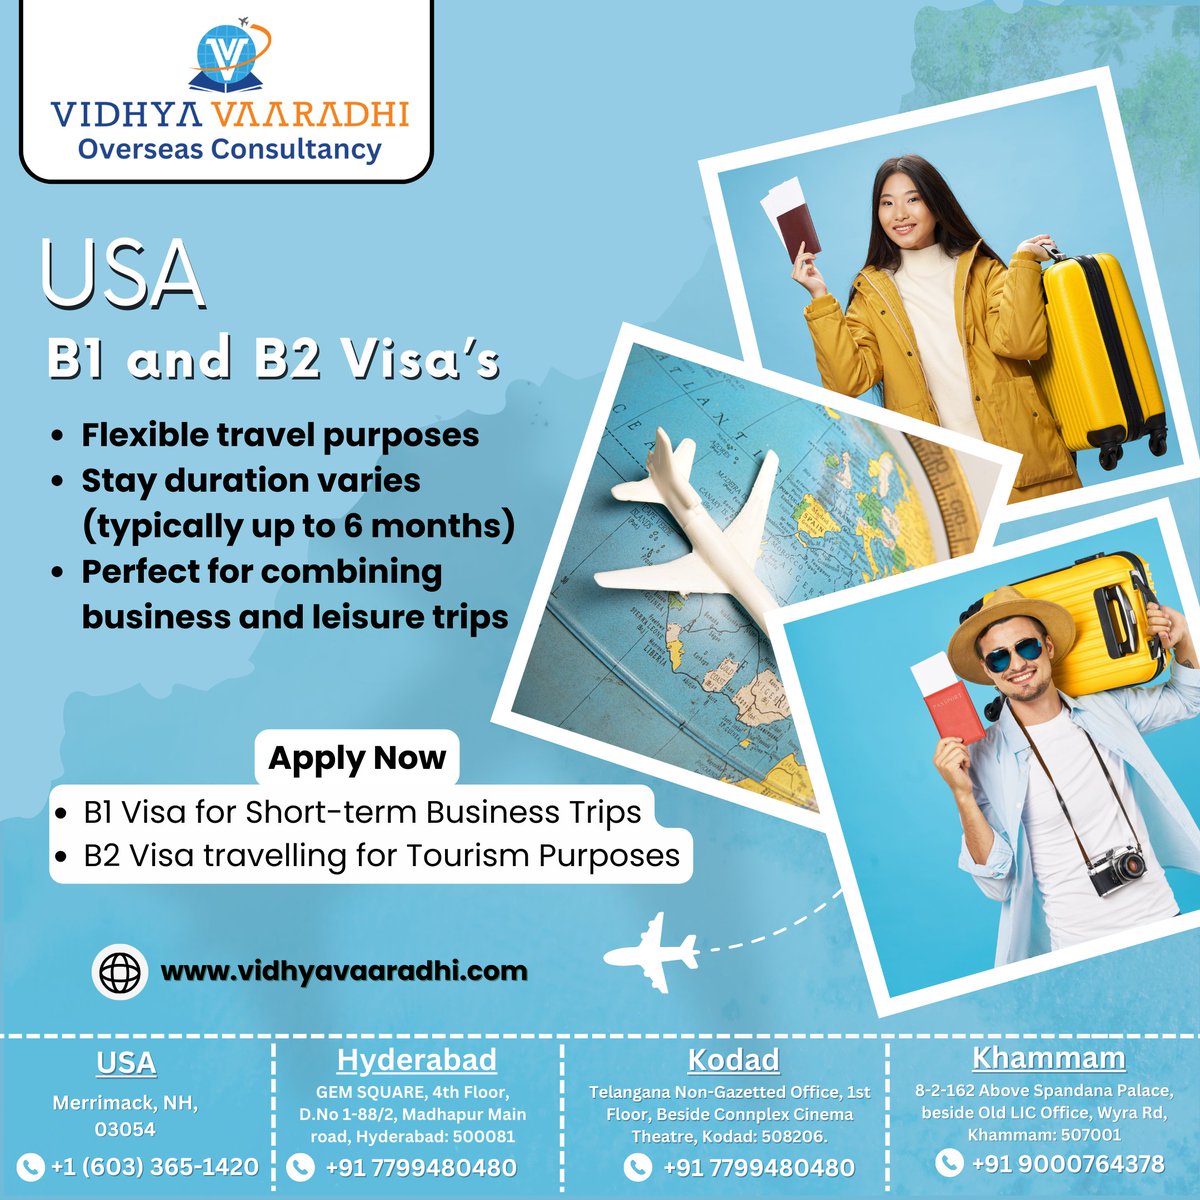 Planning a trip to the United States? Great news! The B1 (Business) and B2 (Tourist) visas are your ticket to amazing experiences
Get in touch with us 
Visit: vidhyavaaradhi.com
Call: +91 90008 41518
#B1B2Visa #TravelUSA #Exploreusa #B1visa #B2visa #businessvisa #touristvisa